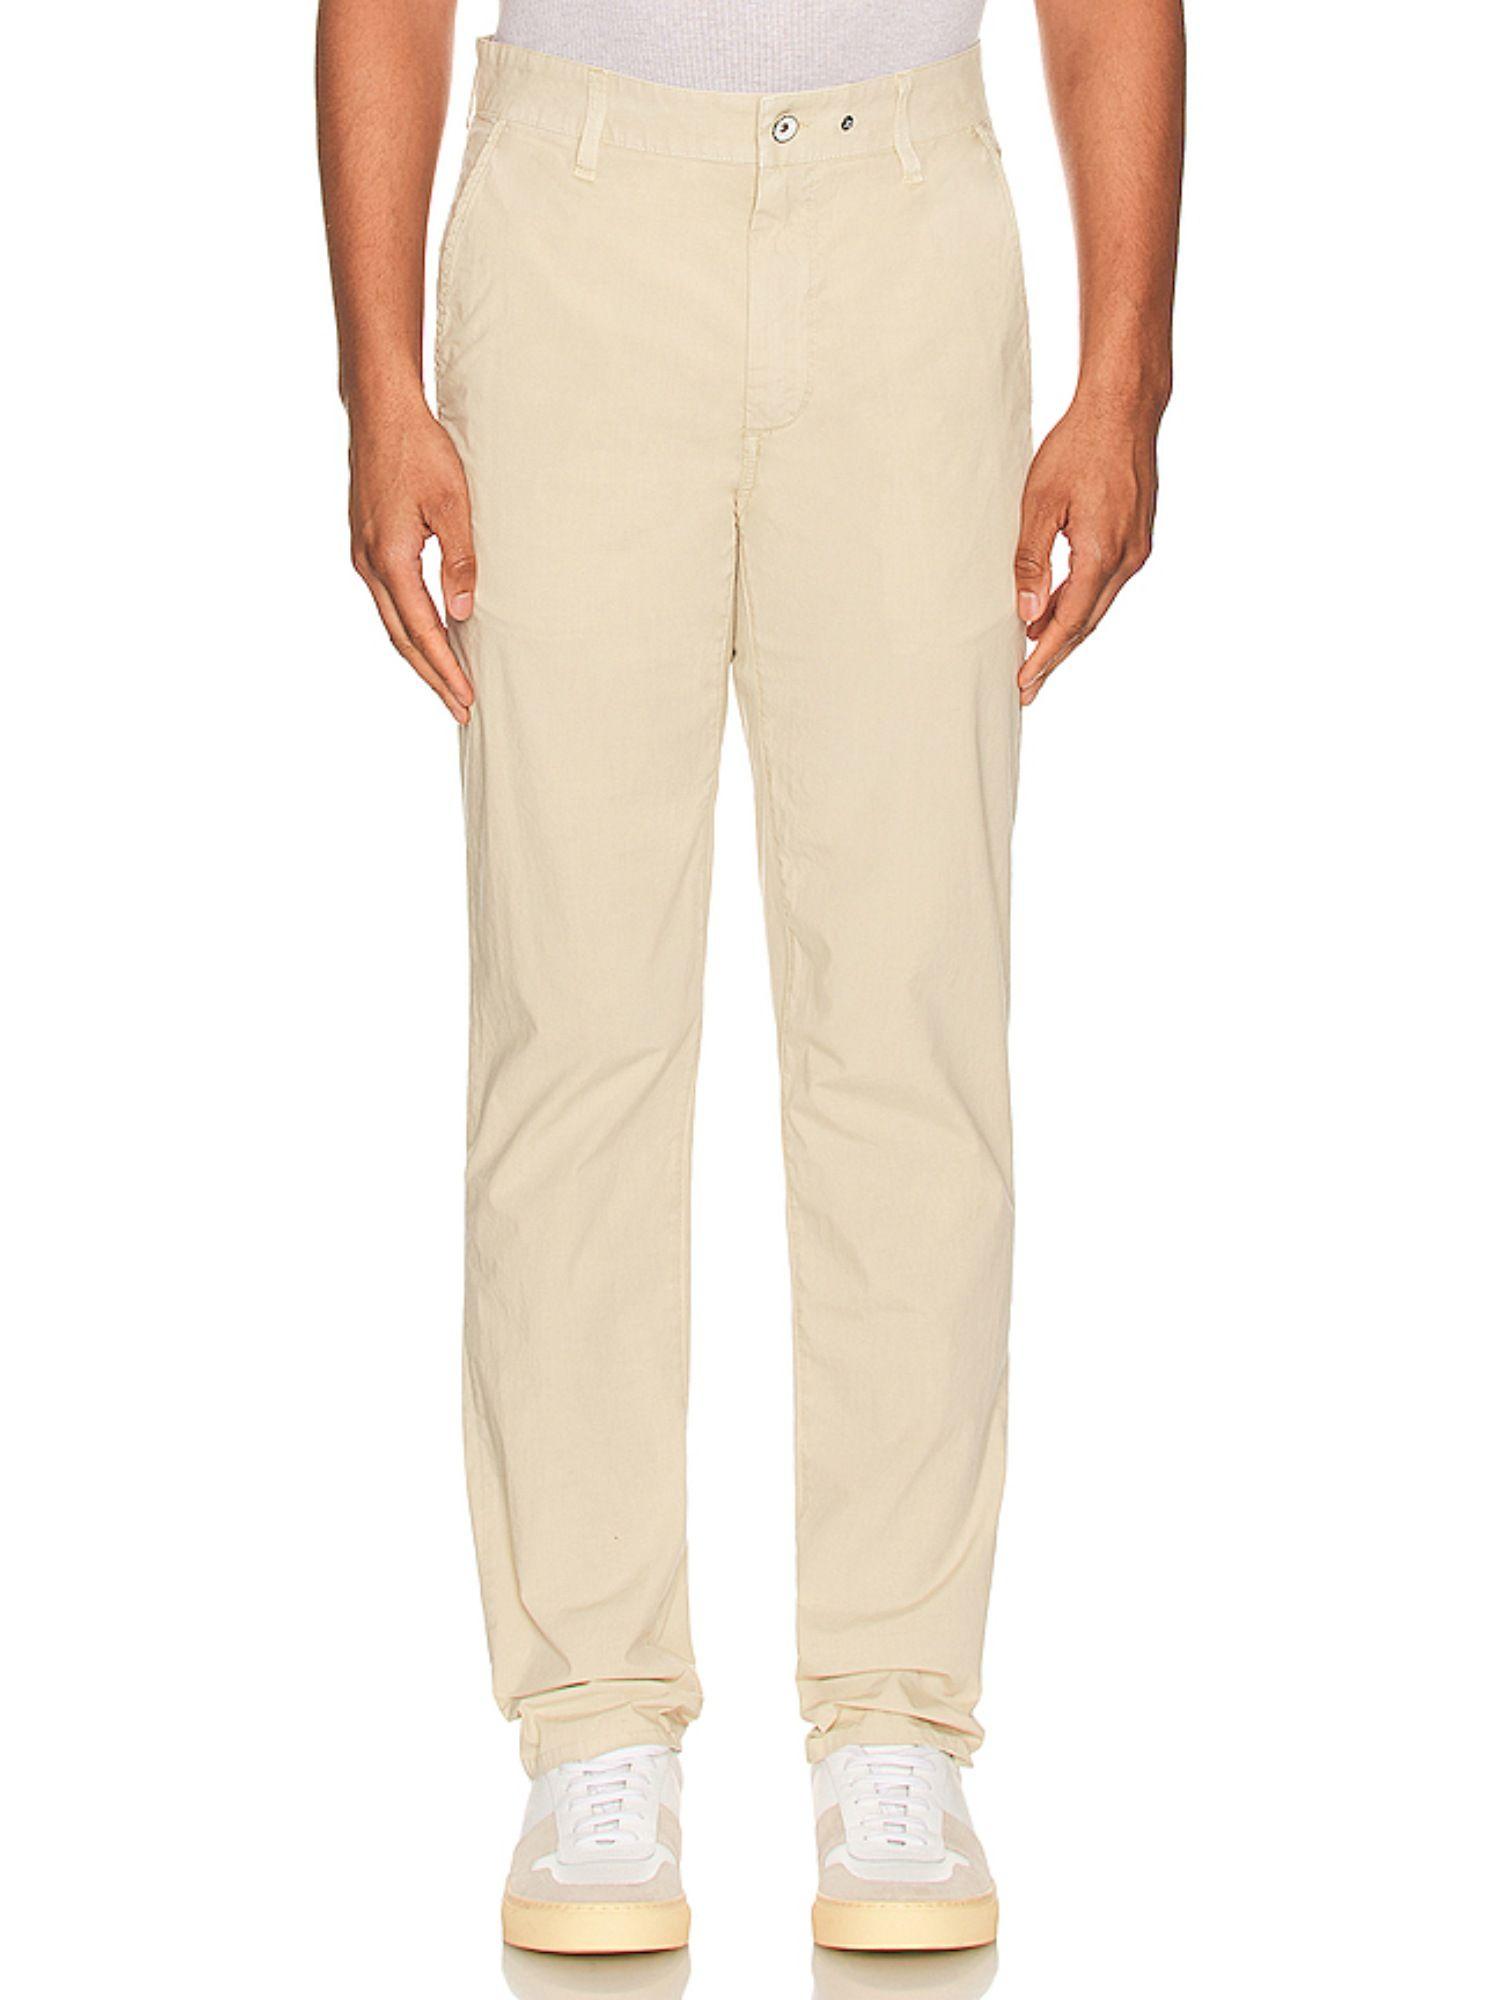 fit-2-stretch-paper-chino